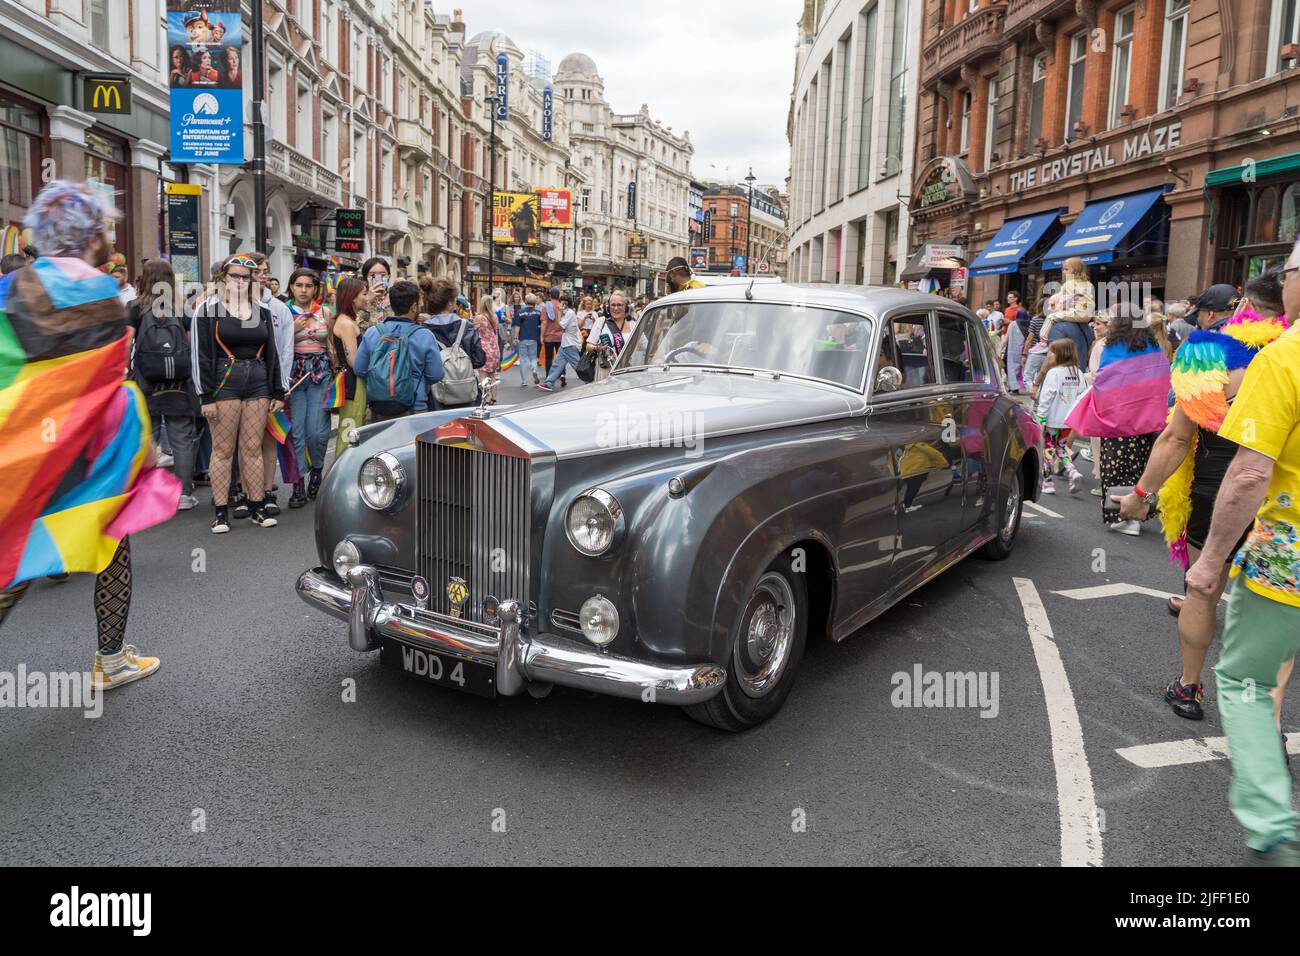 London Pride parade celebrating the 50th anniversary of the LGBTQ event. A silver Rolls Royce in Shaftesbury Avenue surrounded by people. London 2022 Stock Photo